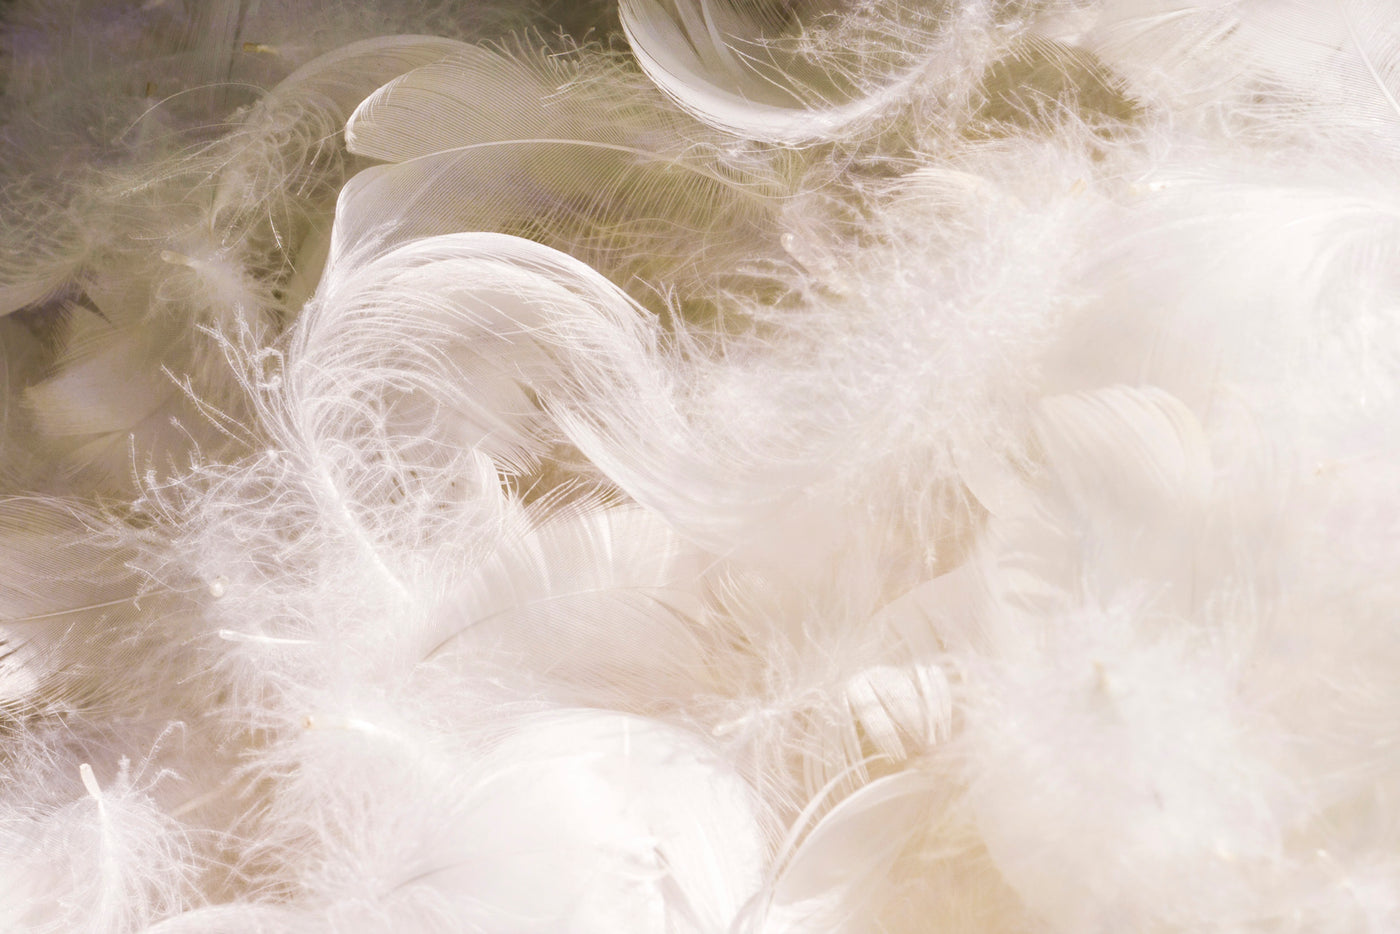 Close-up image of white down feathers